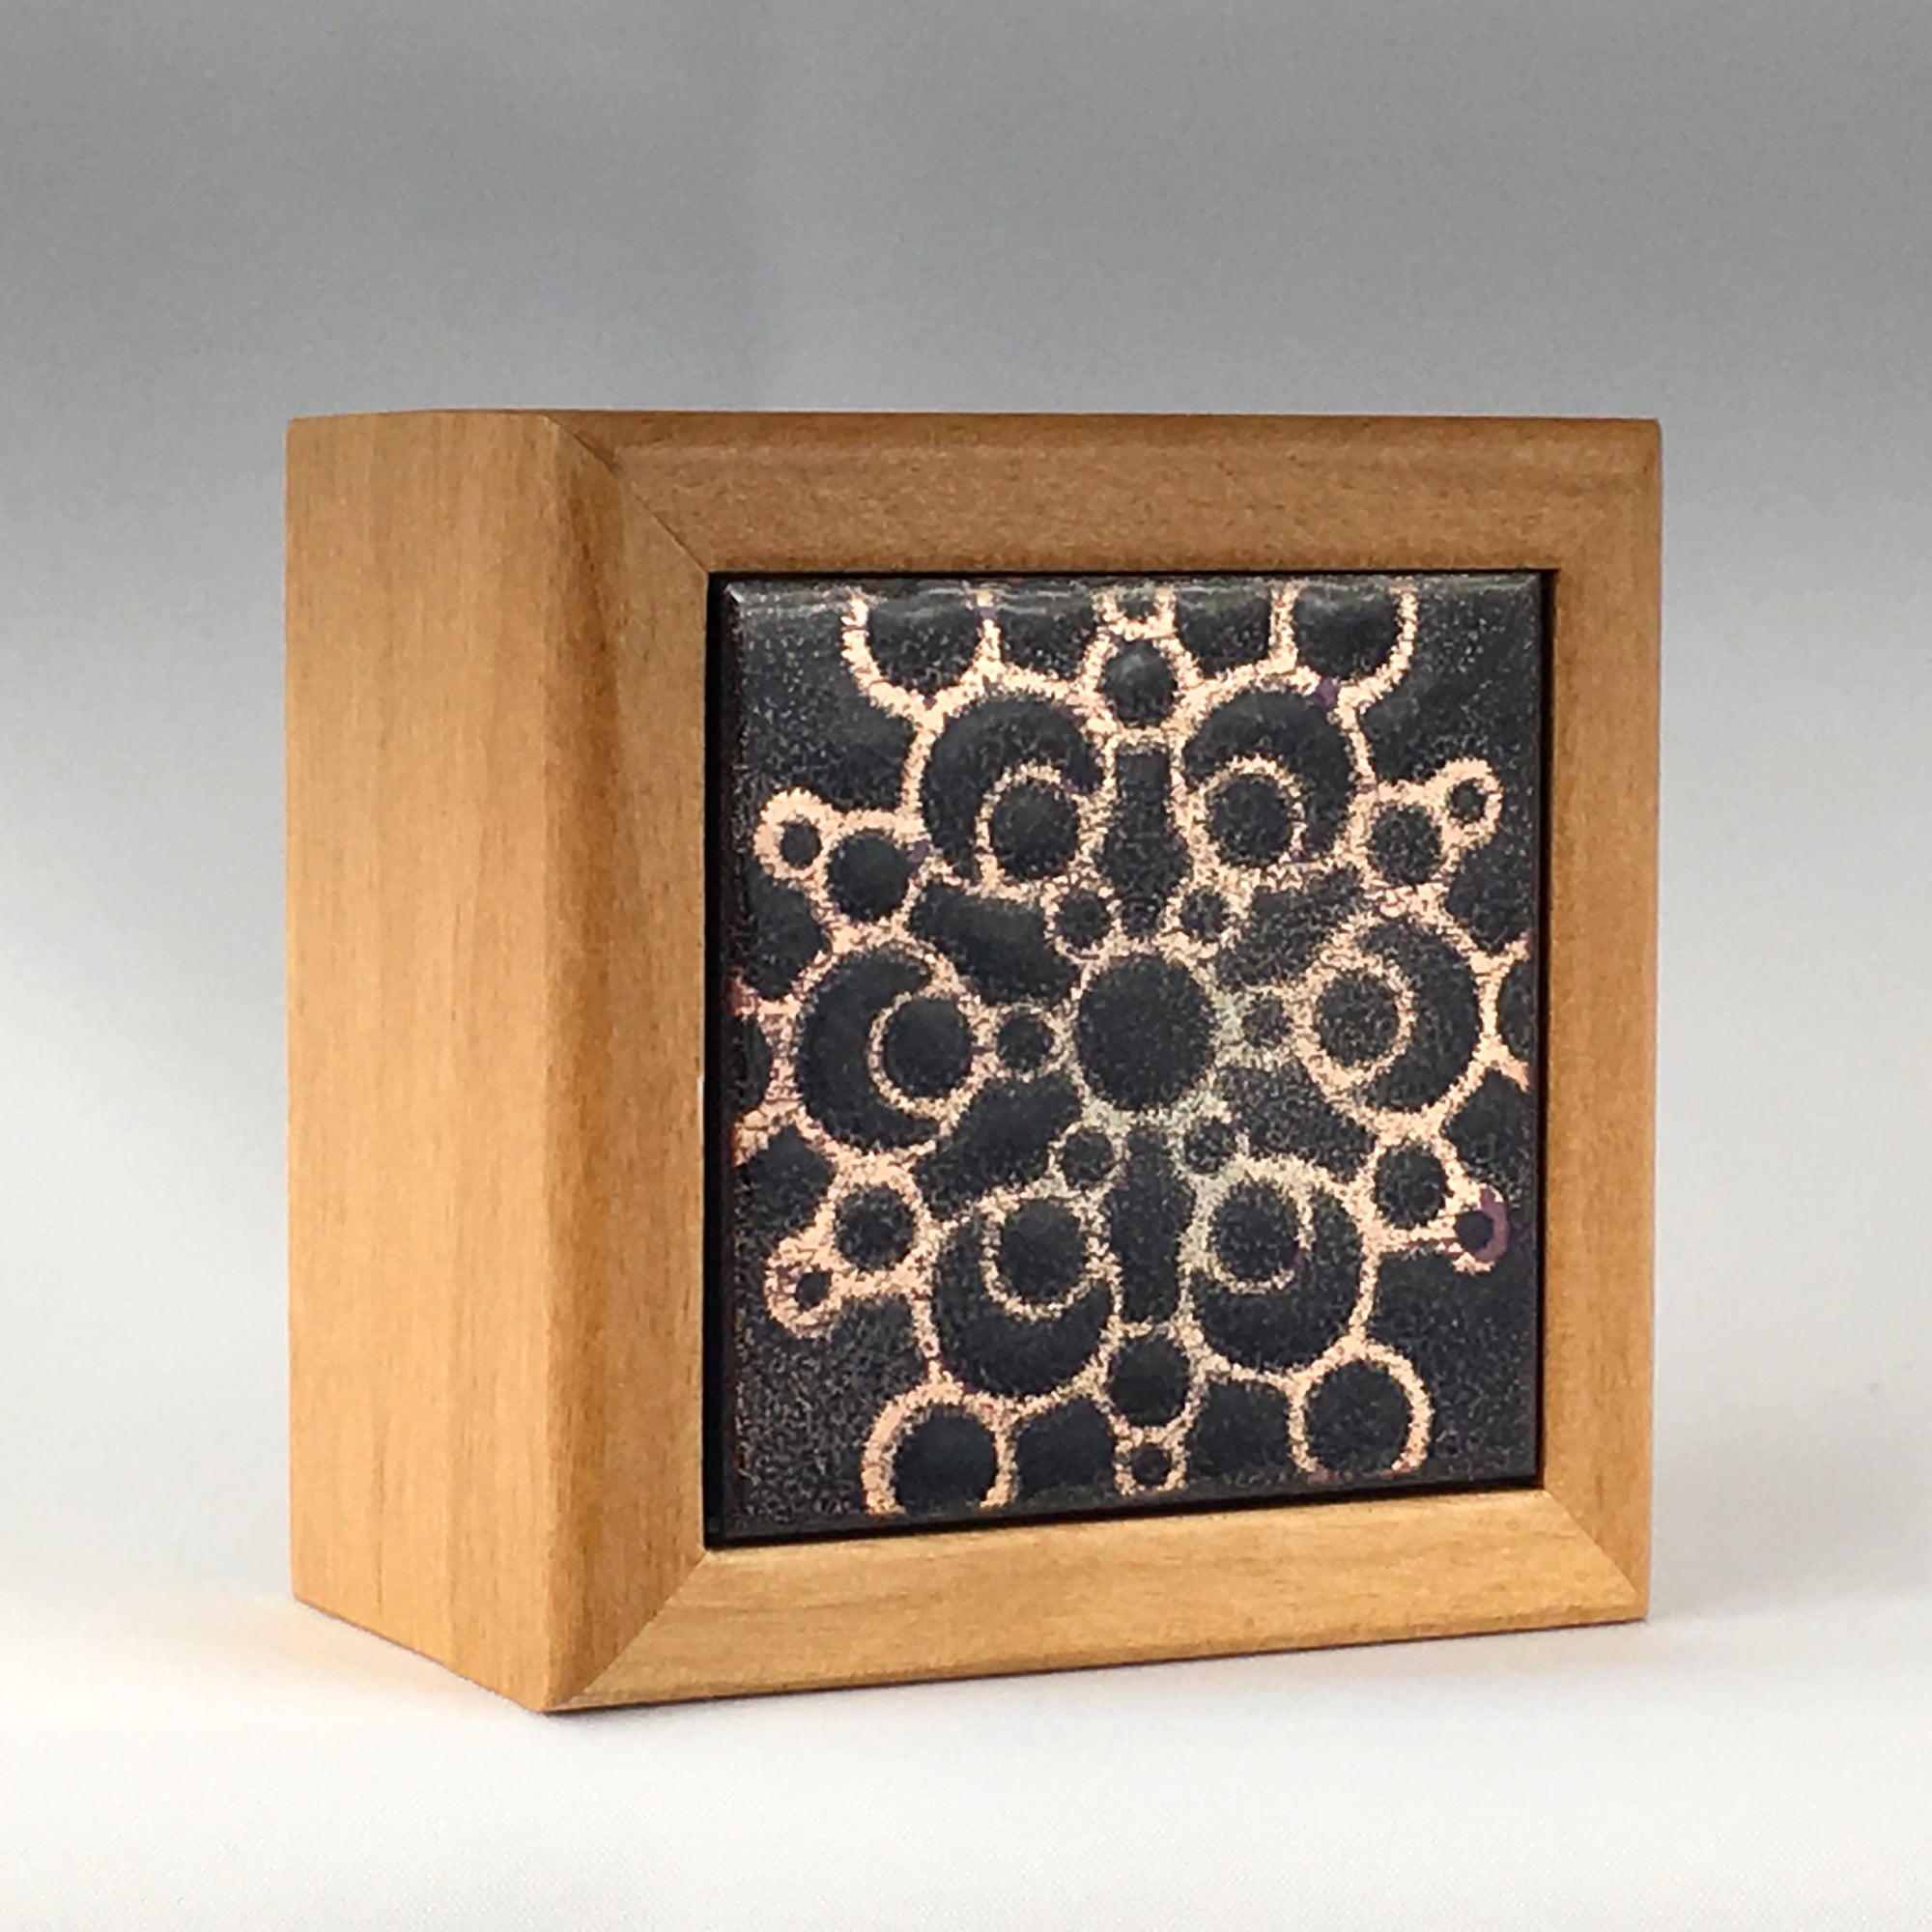 Camille Patton Geometric Snowflake Vitreous Enamel Inlay in lid of wooden box